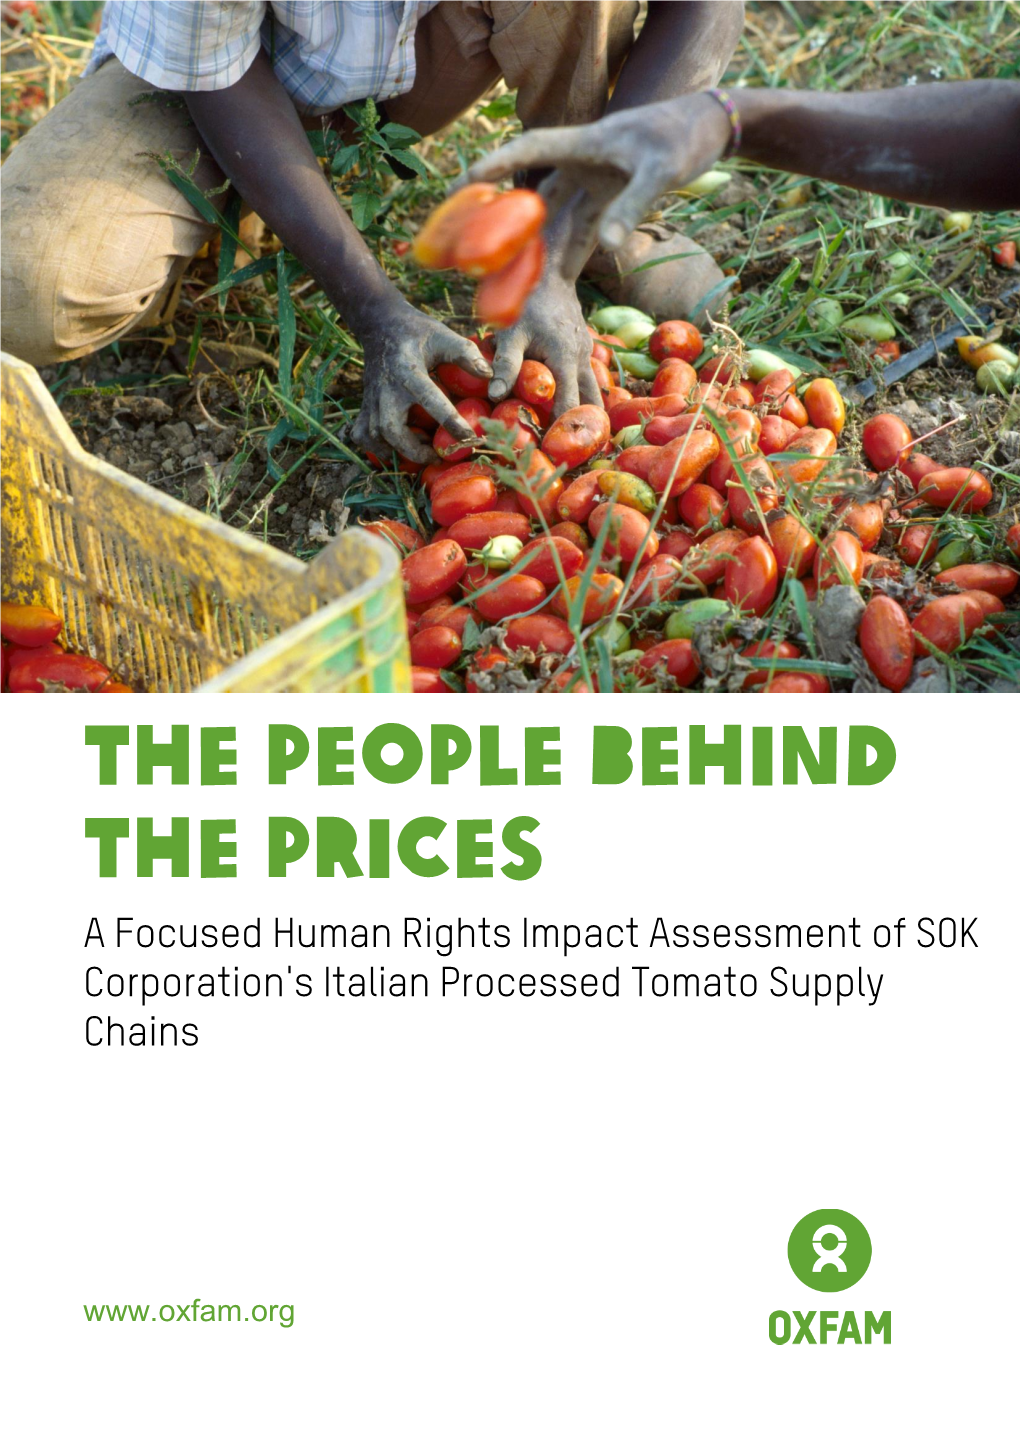 The People Behind the Prices: a Focused Human Rights Impact